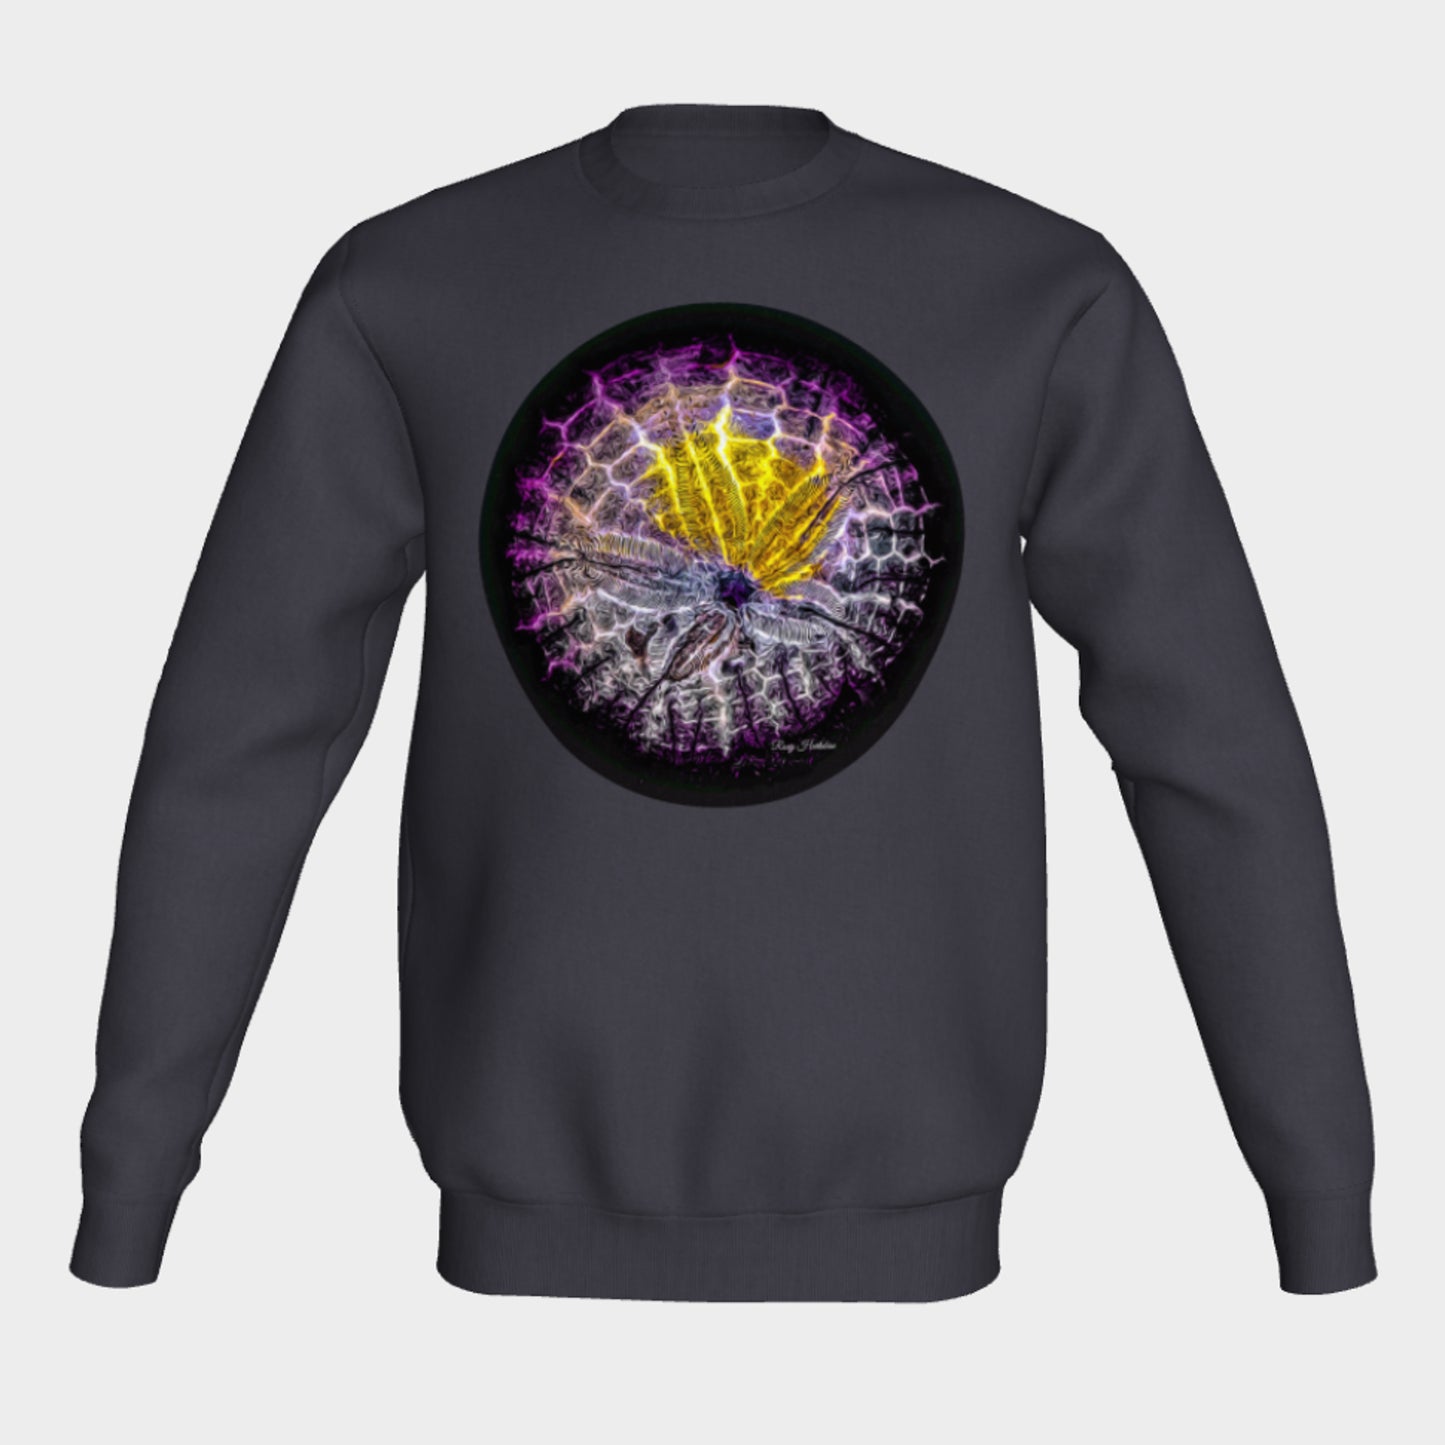 Spotlight Sand Dollar Crewneck Sweatshirt What’s better than a super cozy sweatshirt? A super cozy sweatshirt from Van Isle Goddess!  Super cozy unisex sweatshirt for those chilly days.  Excellent for men or women.   Fit is roomy and comfortable.